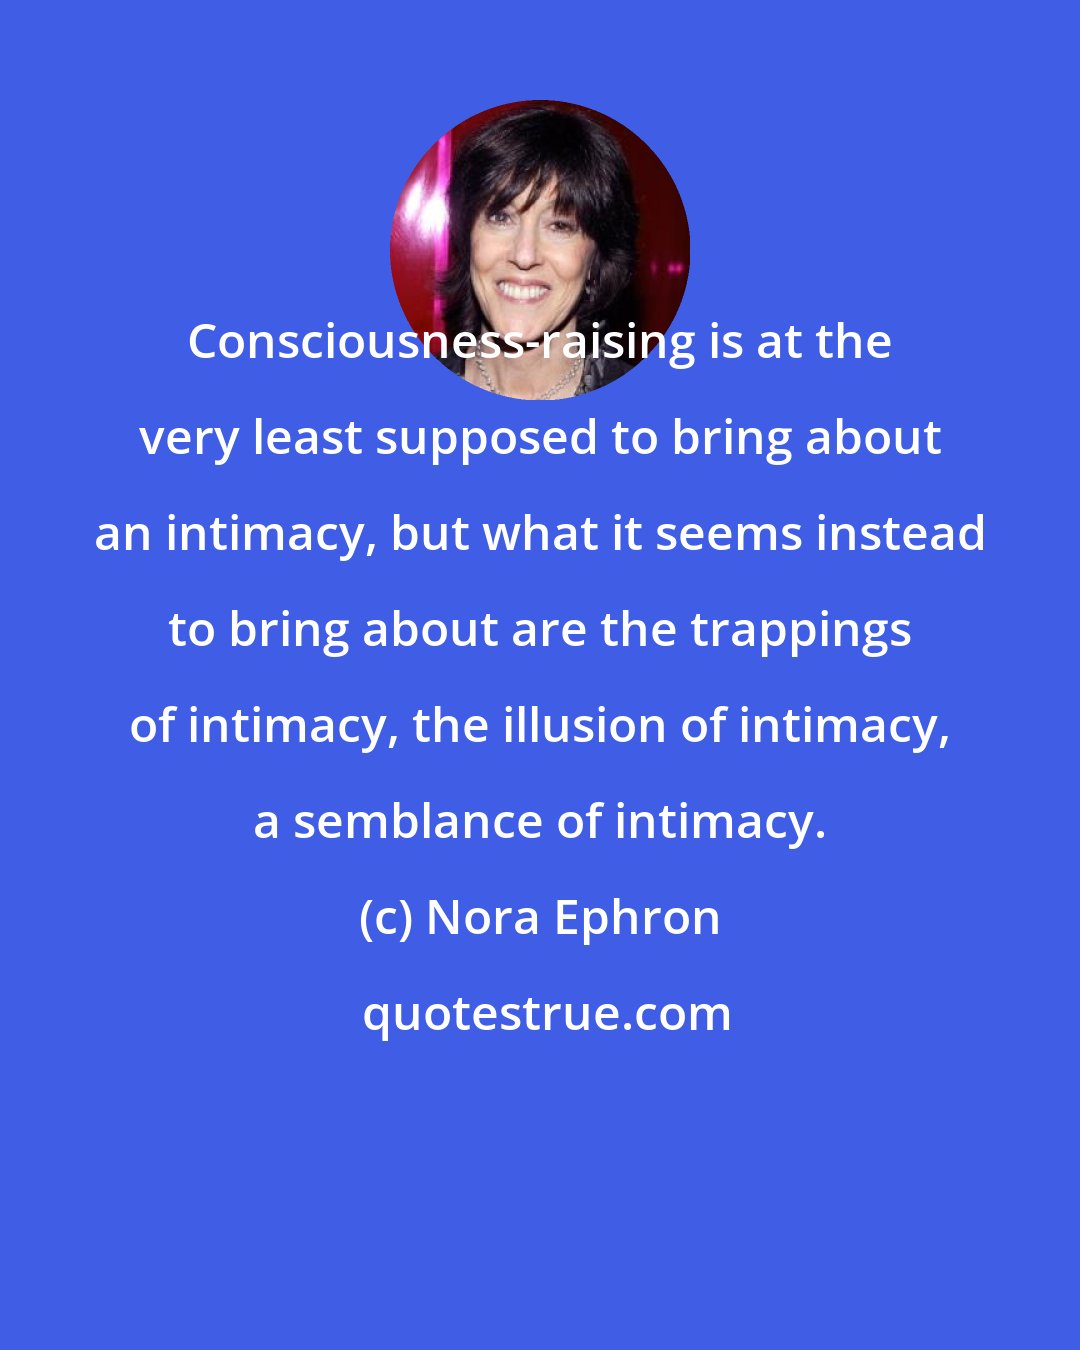 Nora Ephron: Consciousness-raising is at the very least supposed to bring about an intimacy, but what it seems instead to bring about are the trappings of intimacy, the illusion of intimacy, a semblance of intimacy.